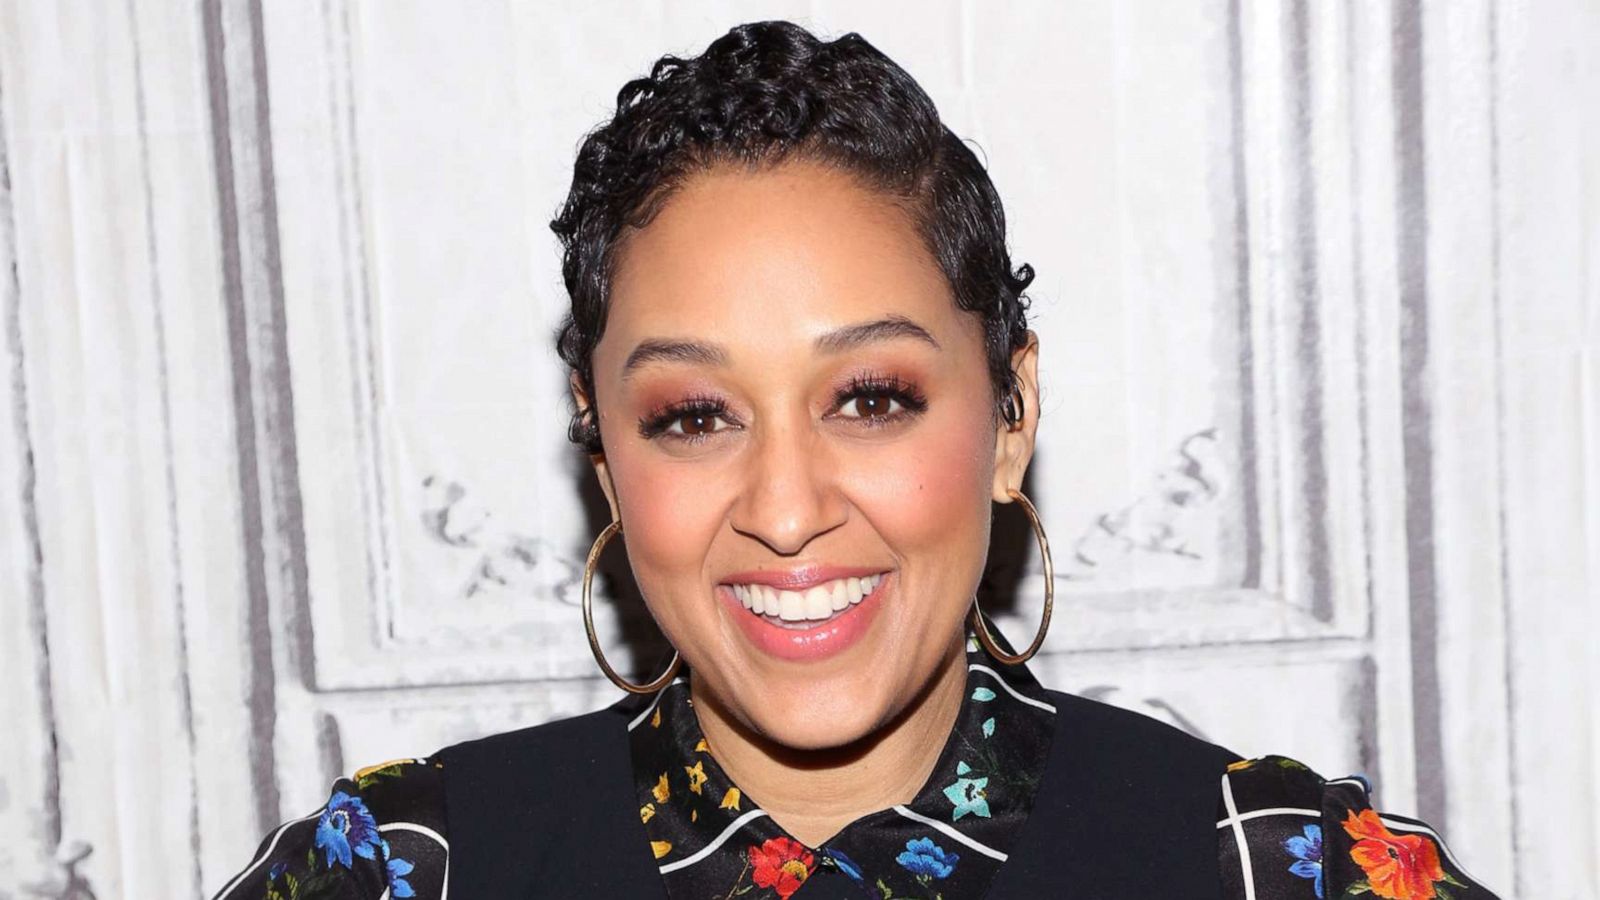 PHOTO: Tia Mowry attends an event on Feb. 4, 2020, in New York City.